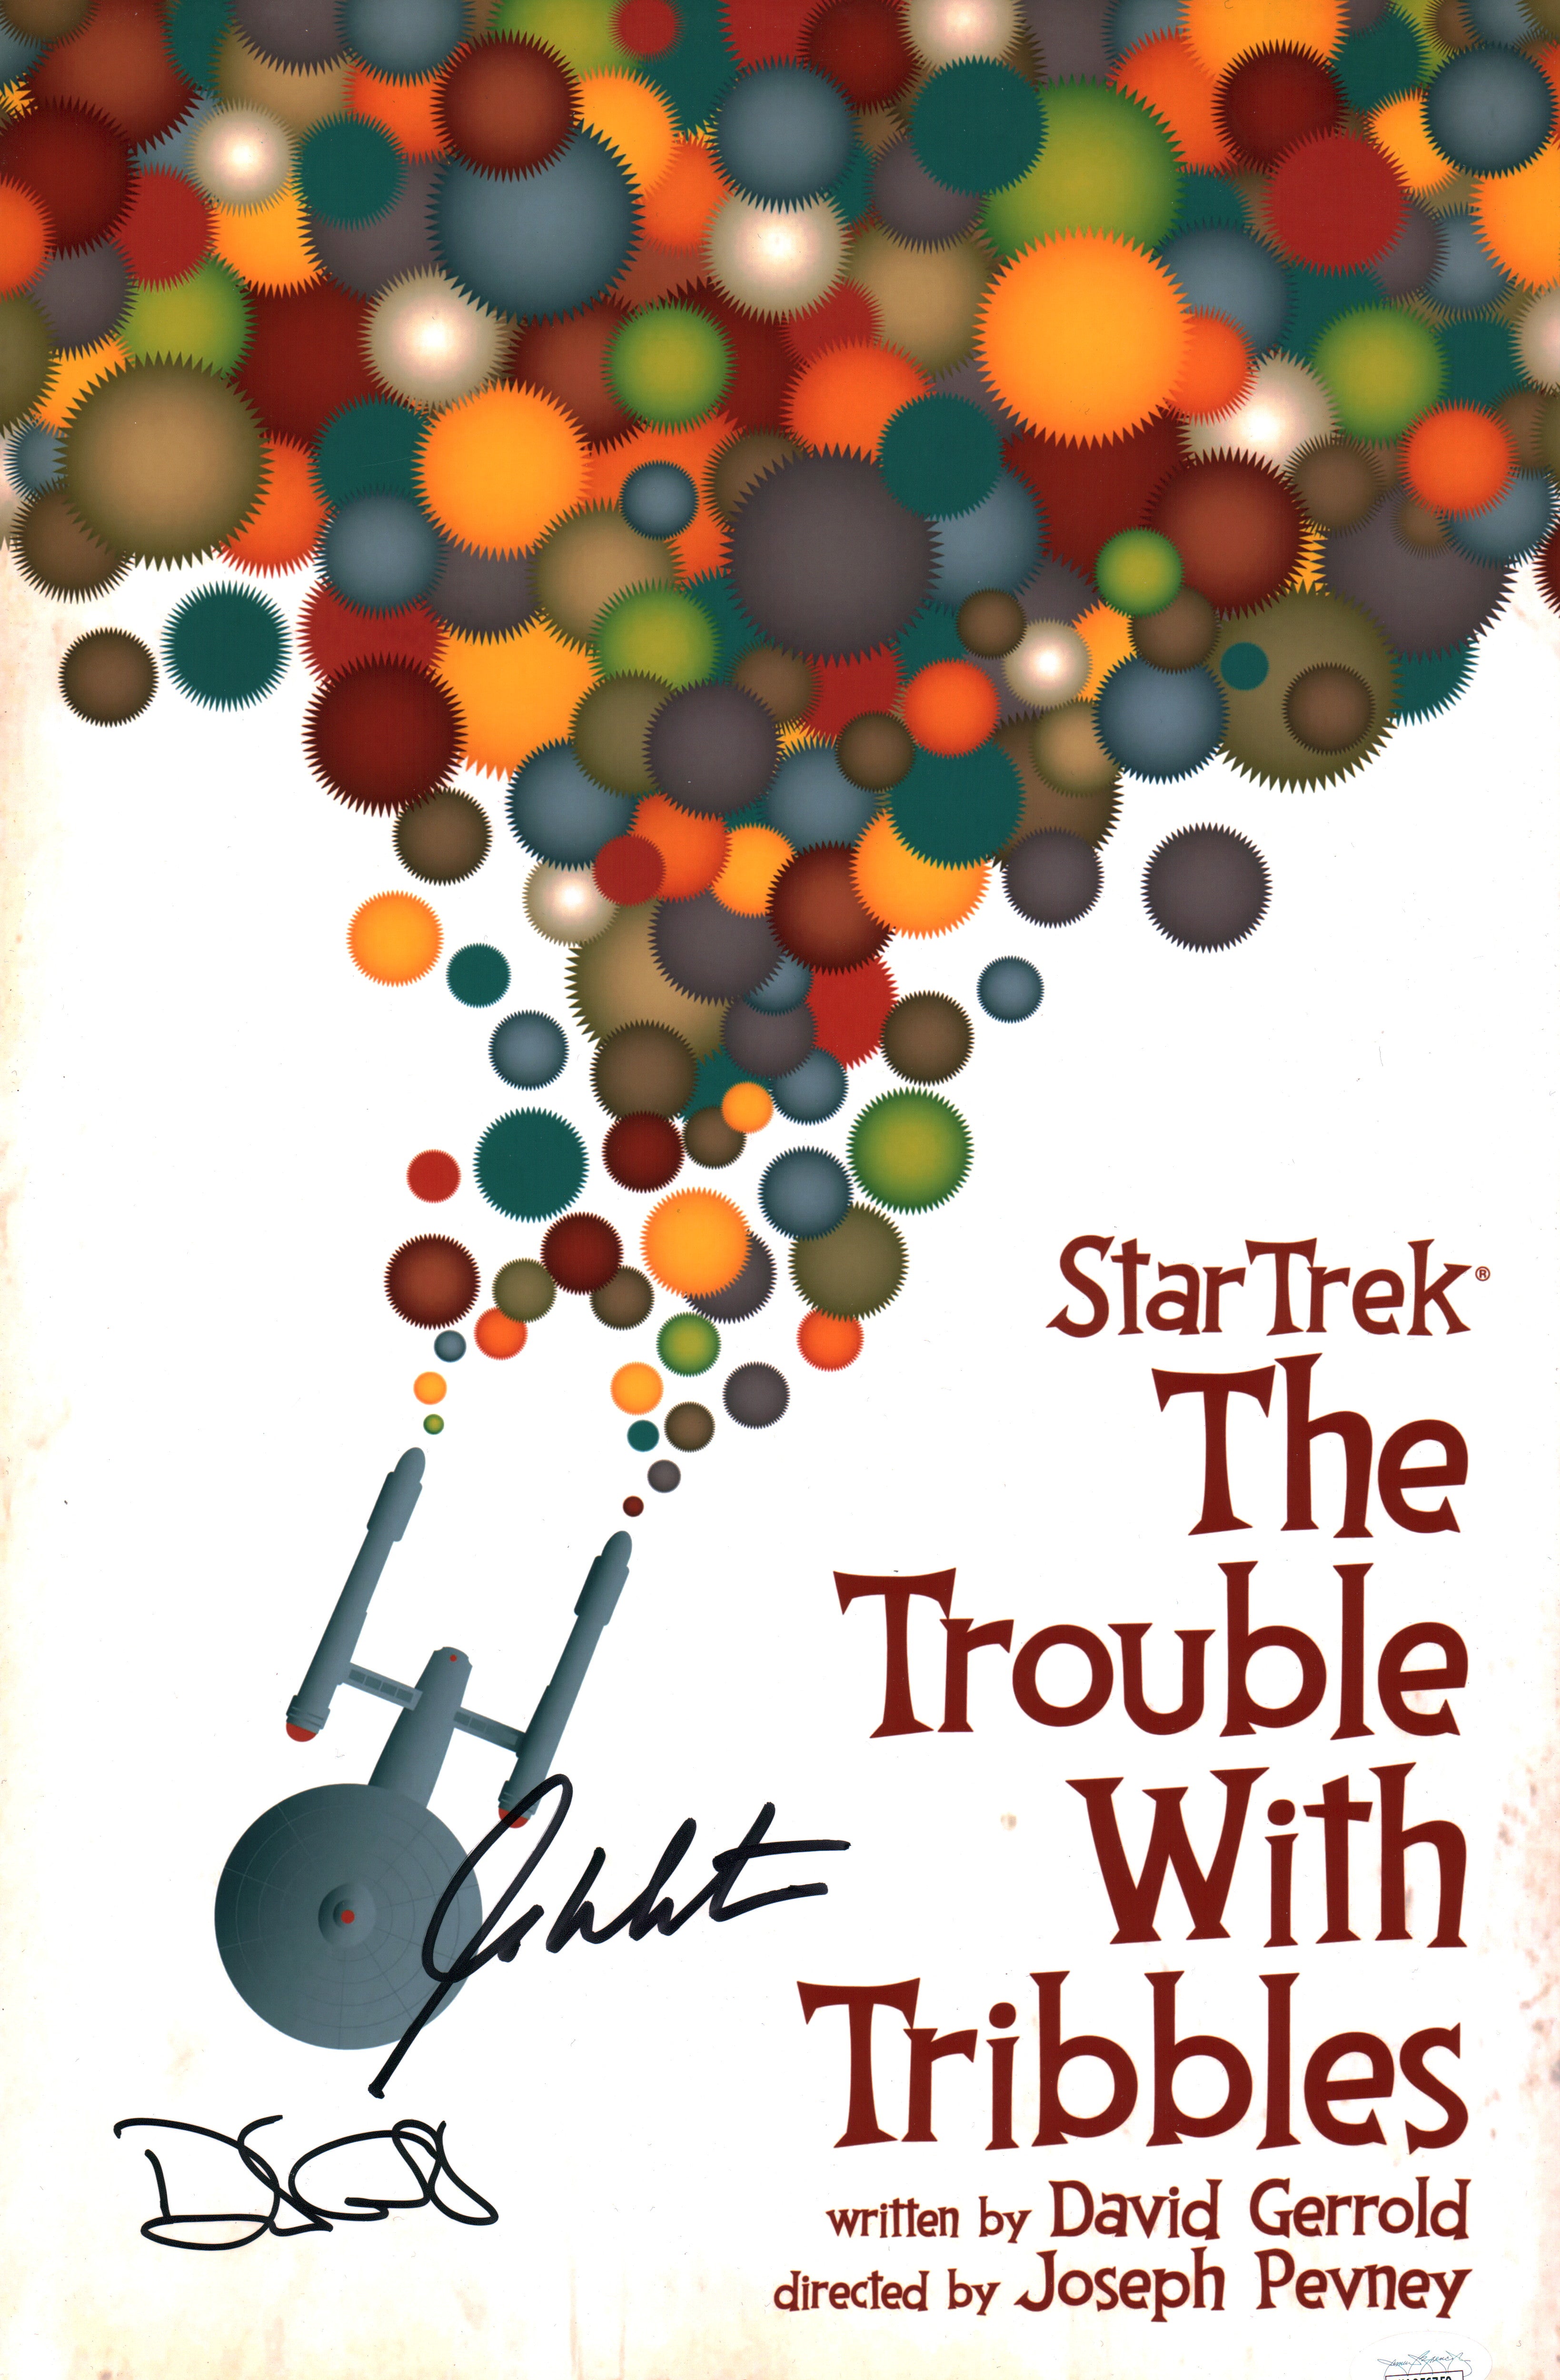 Star Trek: The Trouble With Tribbles 11x17 Mini Poster Signed x2 Gerrold Shatner JSA Certified Autograph